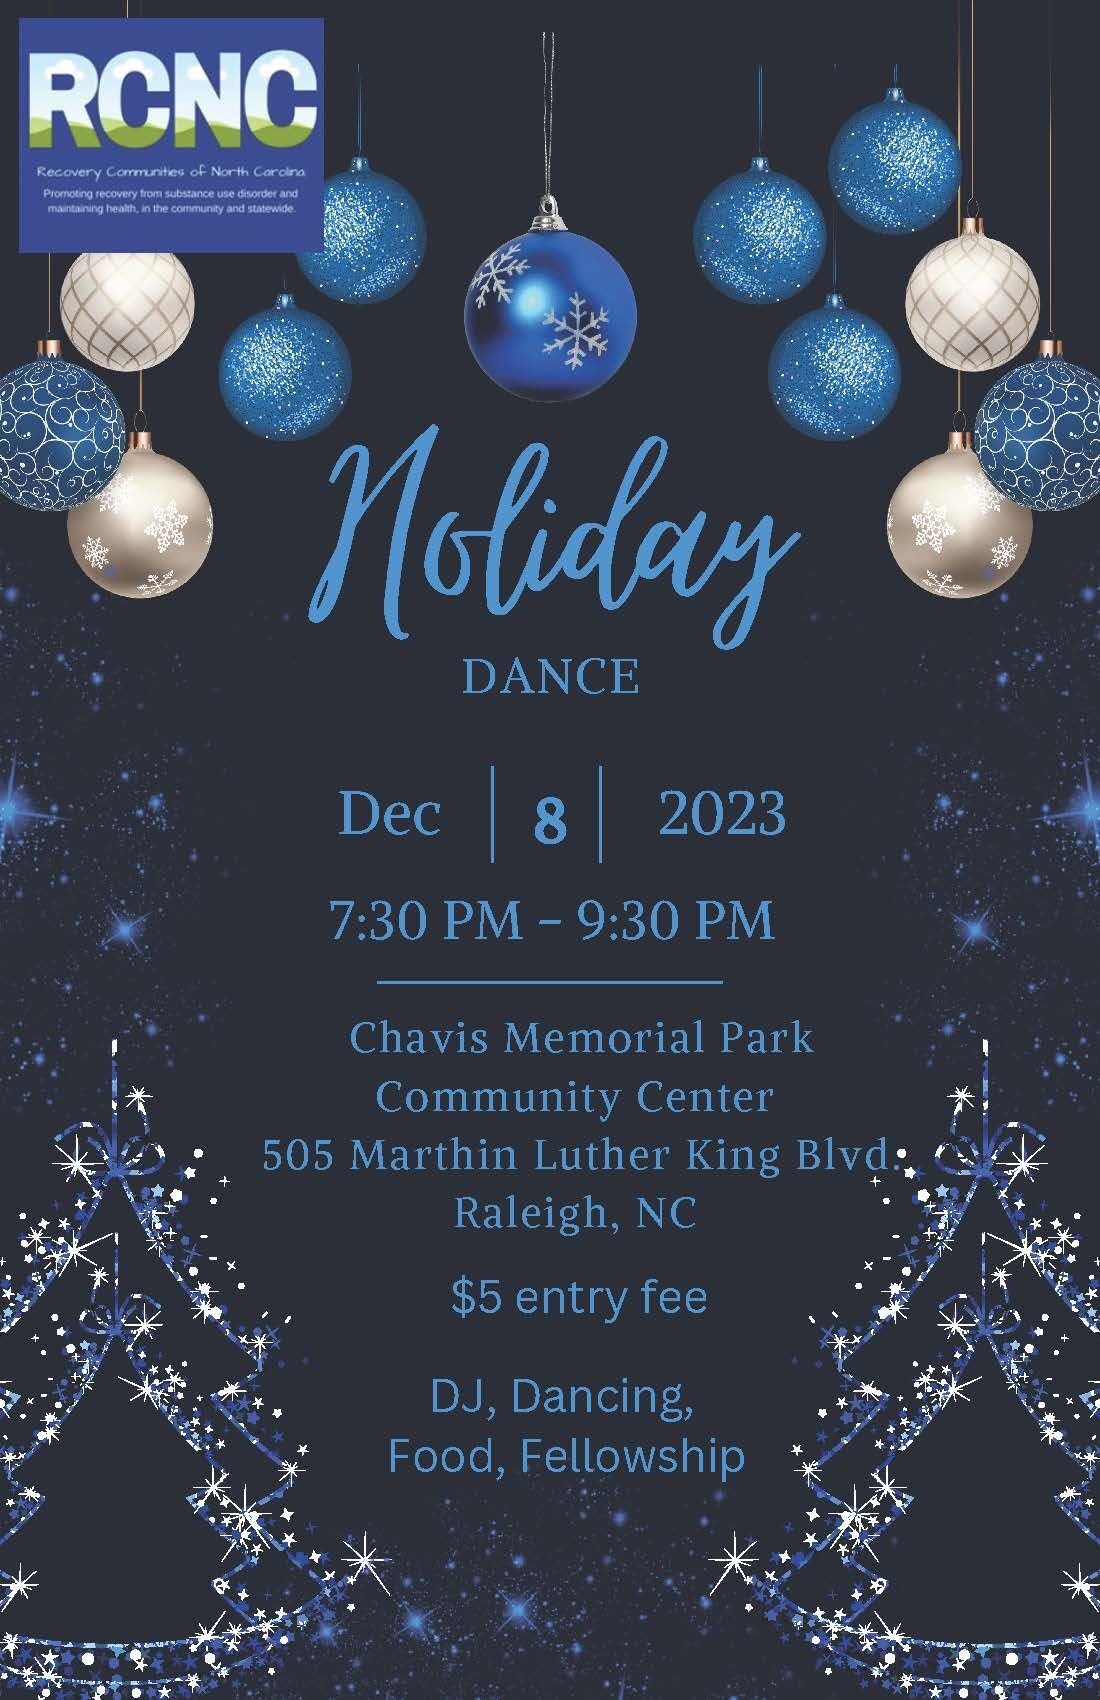 You're Invited: RCNC's Holiday Dance on December 8th